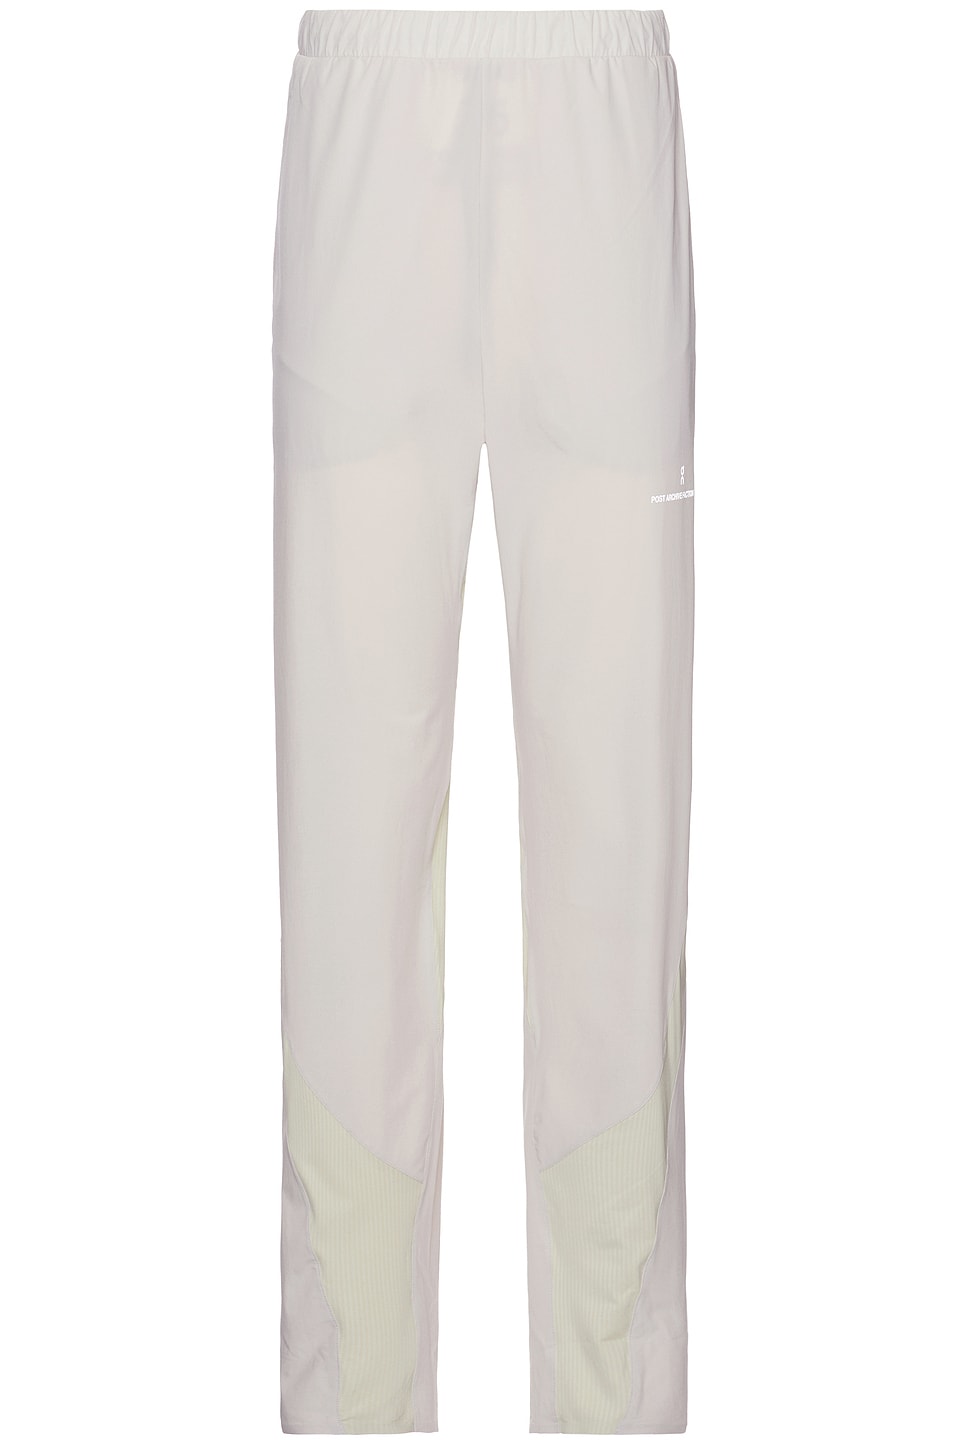 x Post Archive Faction (PAF) Pants in Light Grey